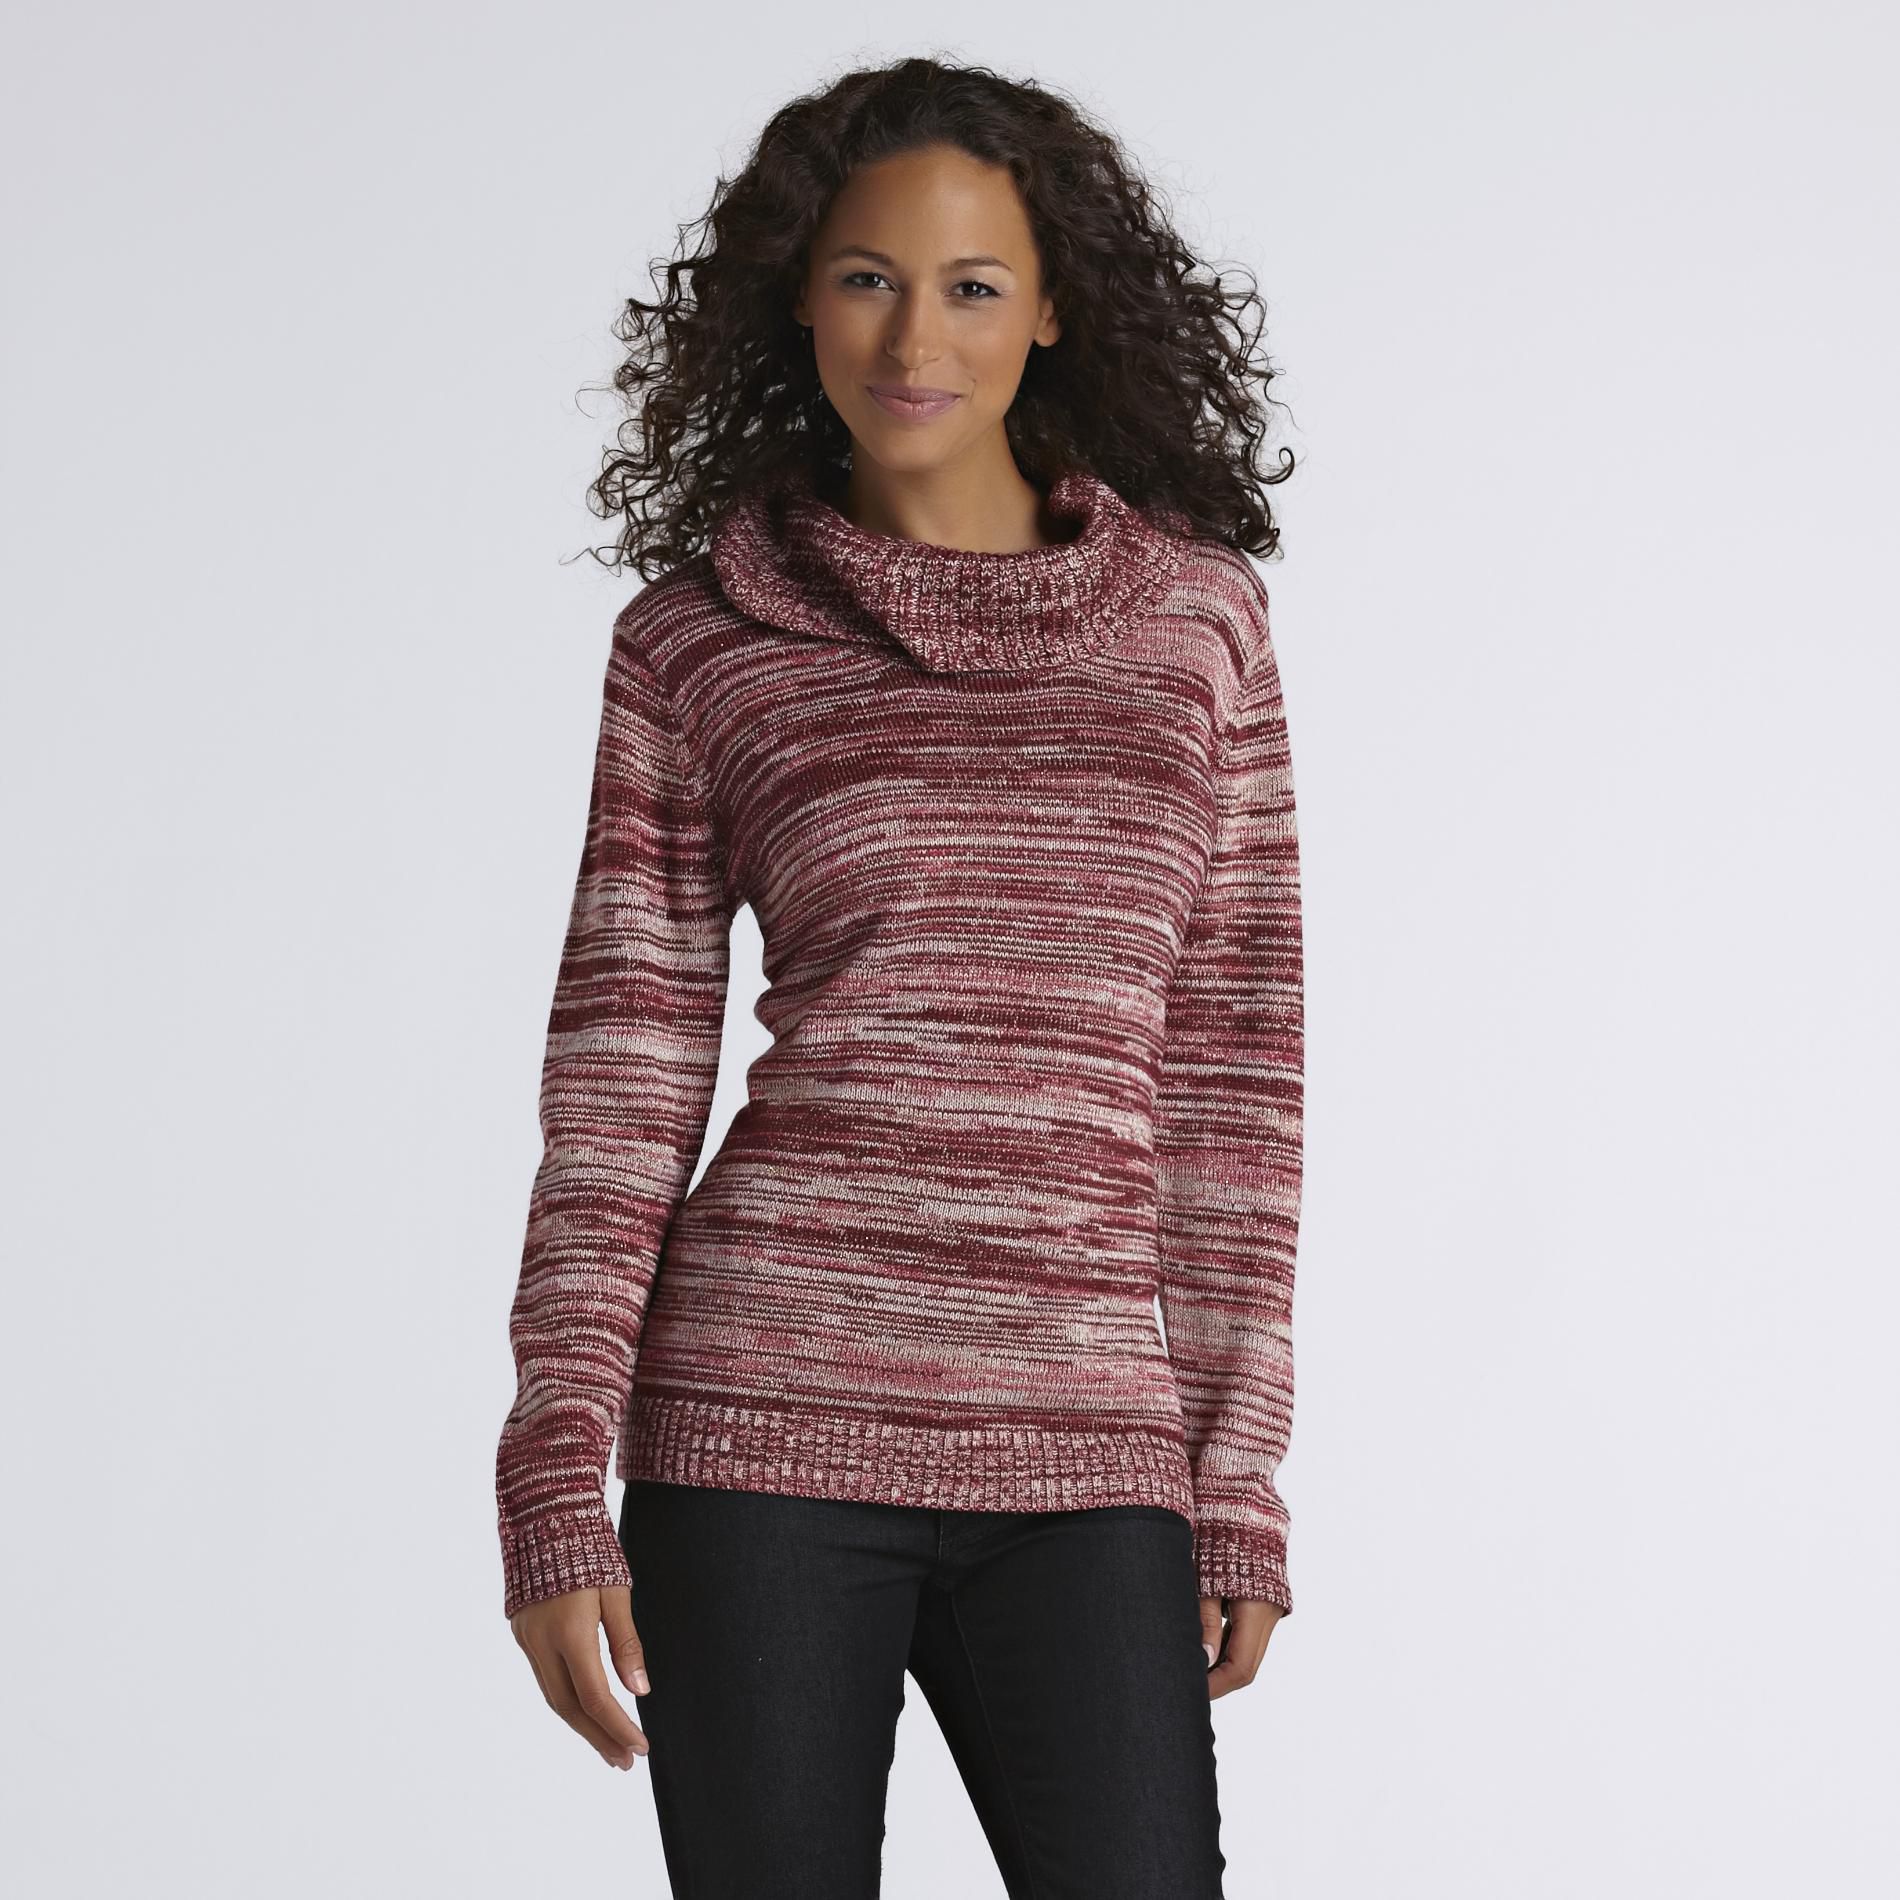 Basic Editions Women's Cowl Neck Sweater - Clearance